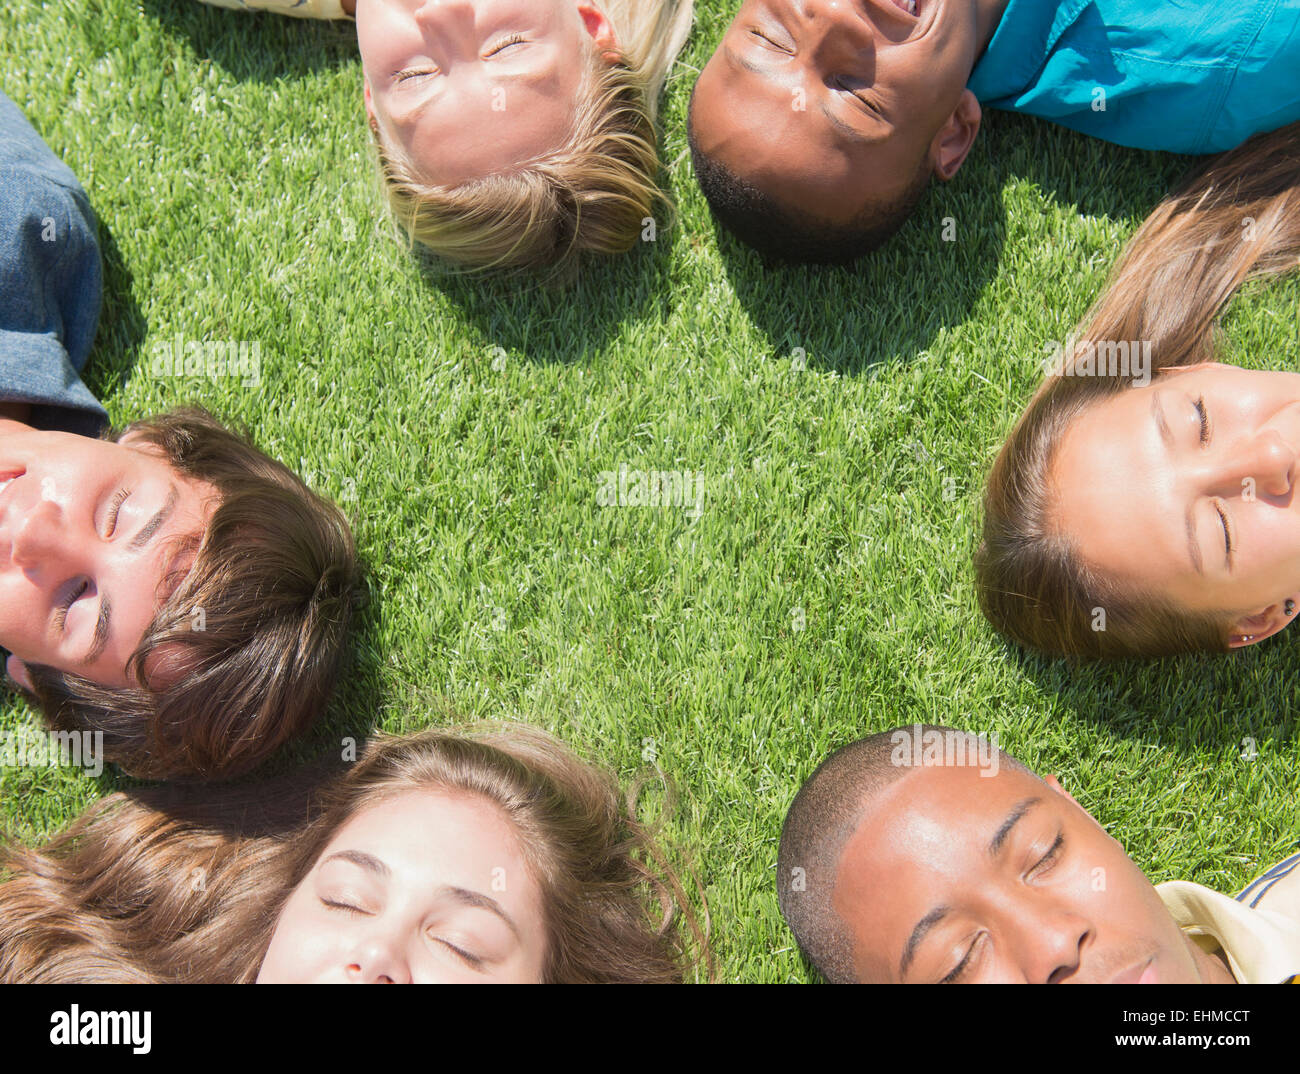 High angle view of teenagers sleeping on grass lawn Stock Photo